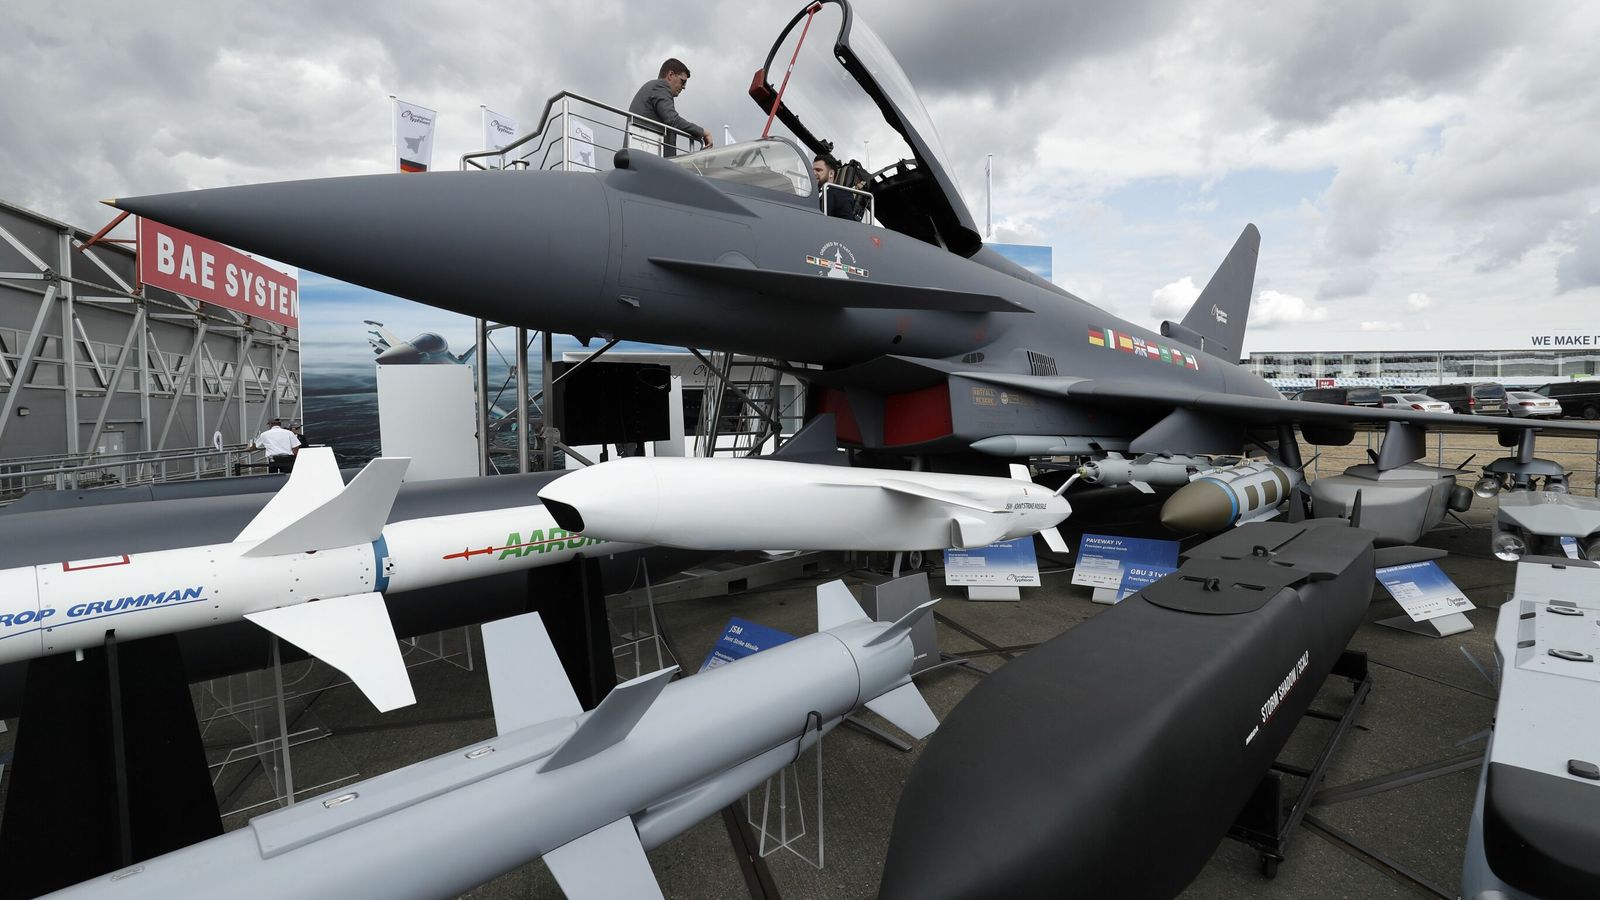 BAE Systems '4,000 UK jobs sustained' by £2.4bn munitions contract